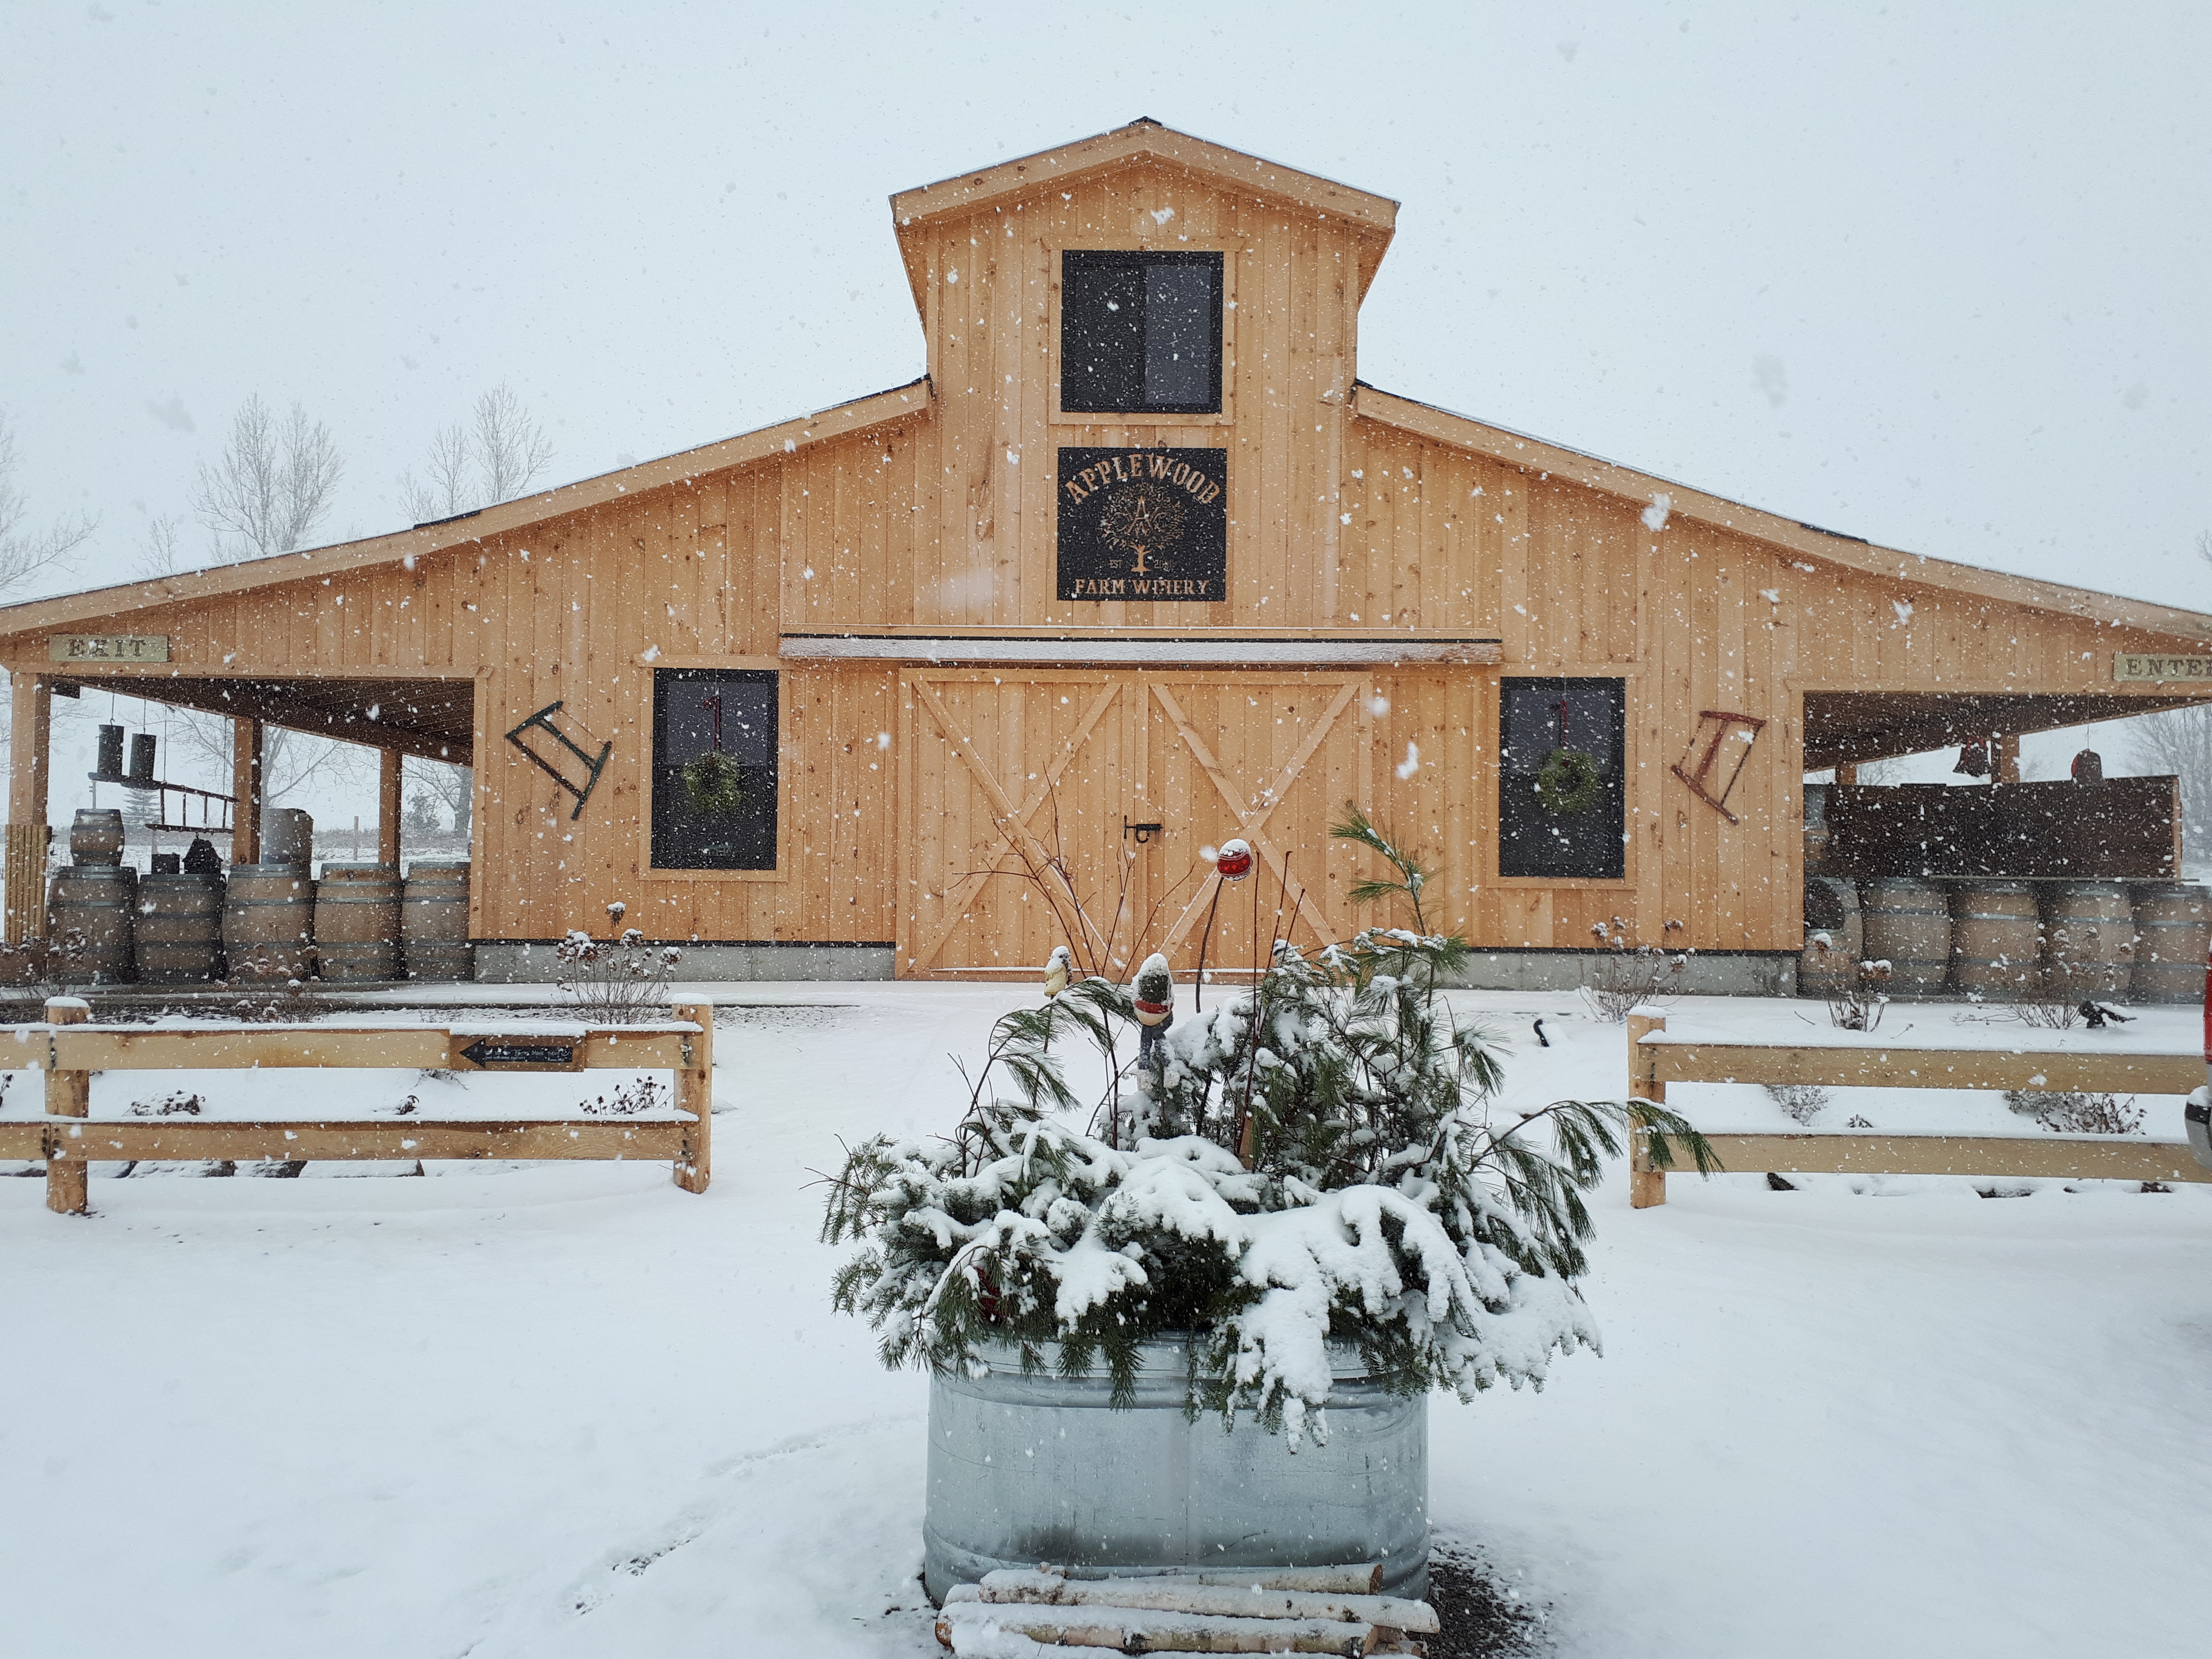 Exterior of Applewood Farm Winery wooden building with snow